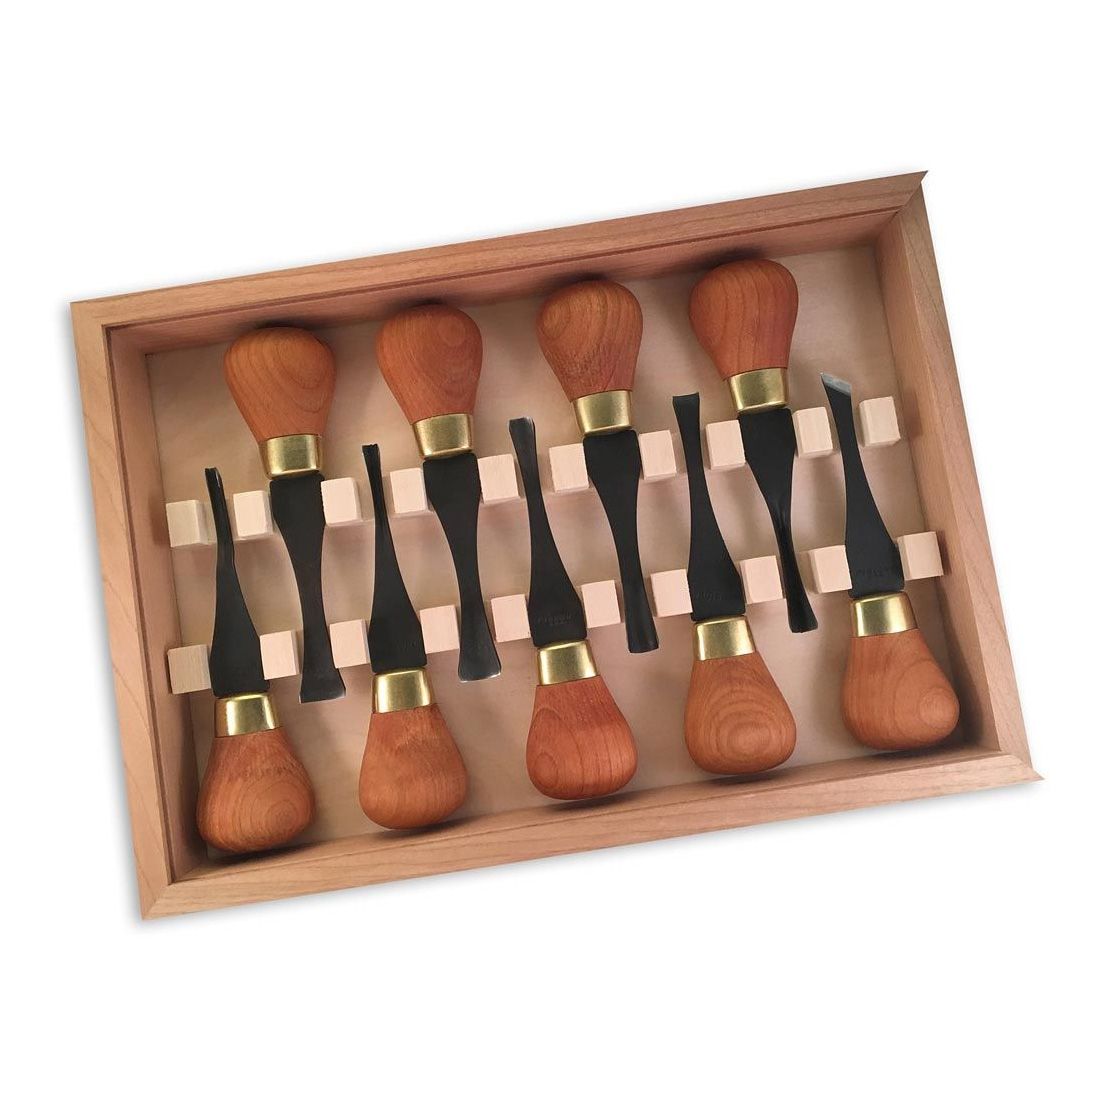 Flexcut FRP405 9pc premium deluxe palm set, shown in the wooden box with each knife positioned in racks.